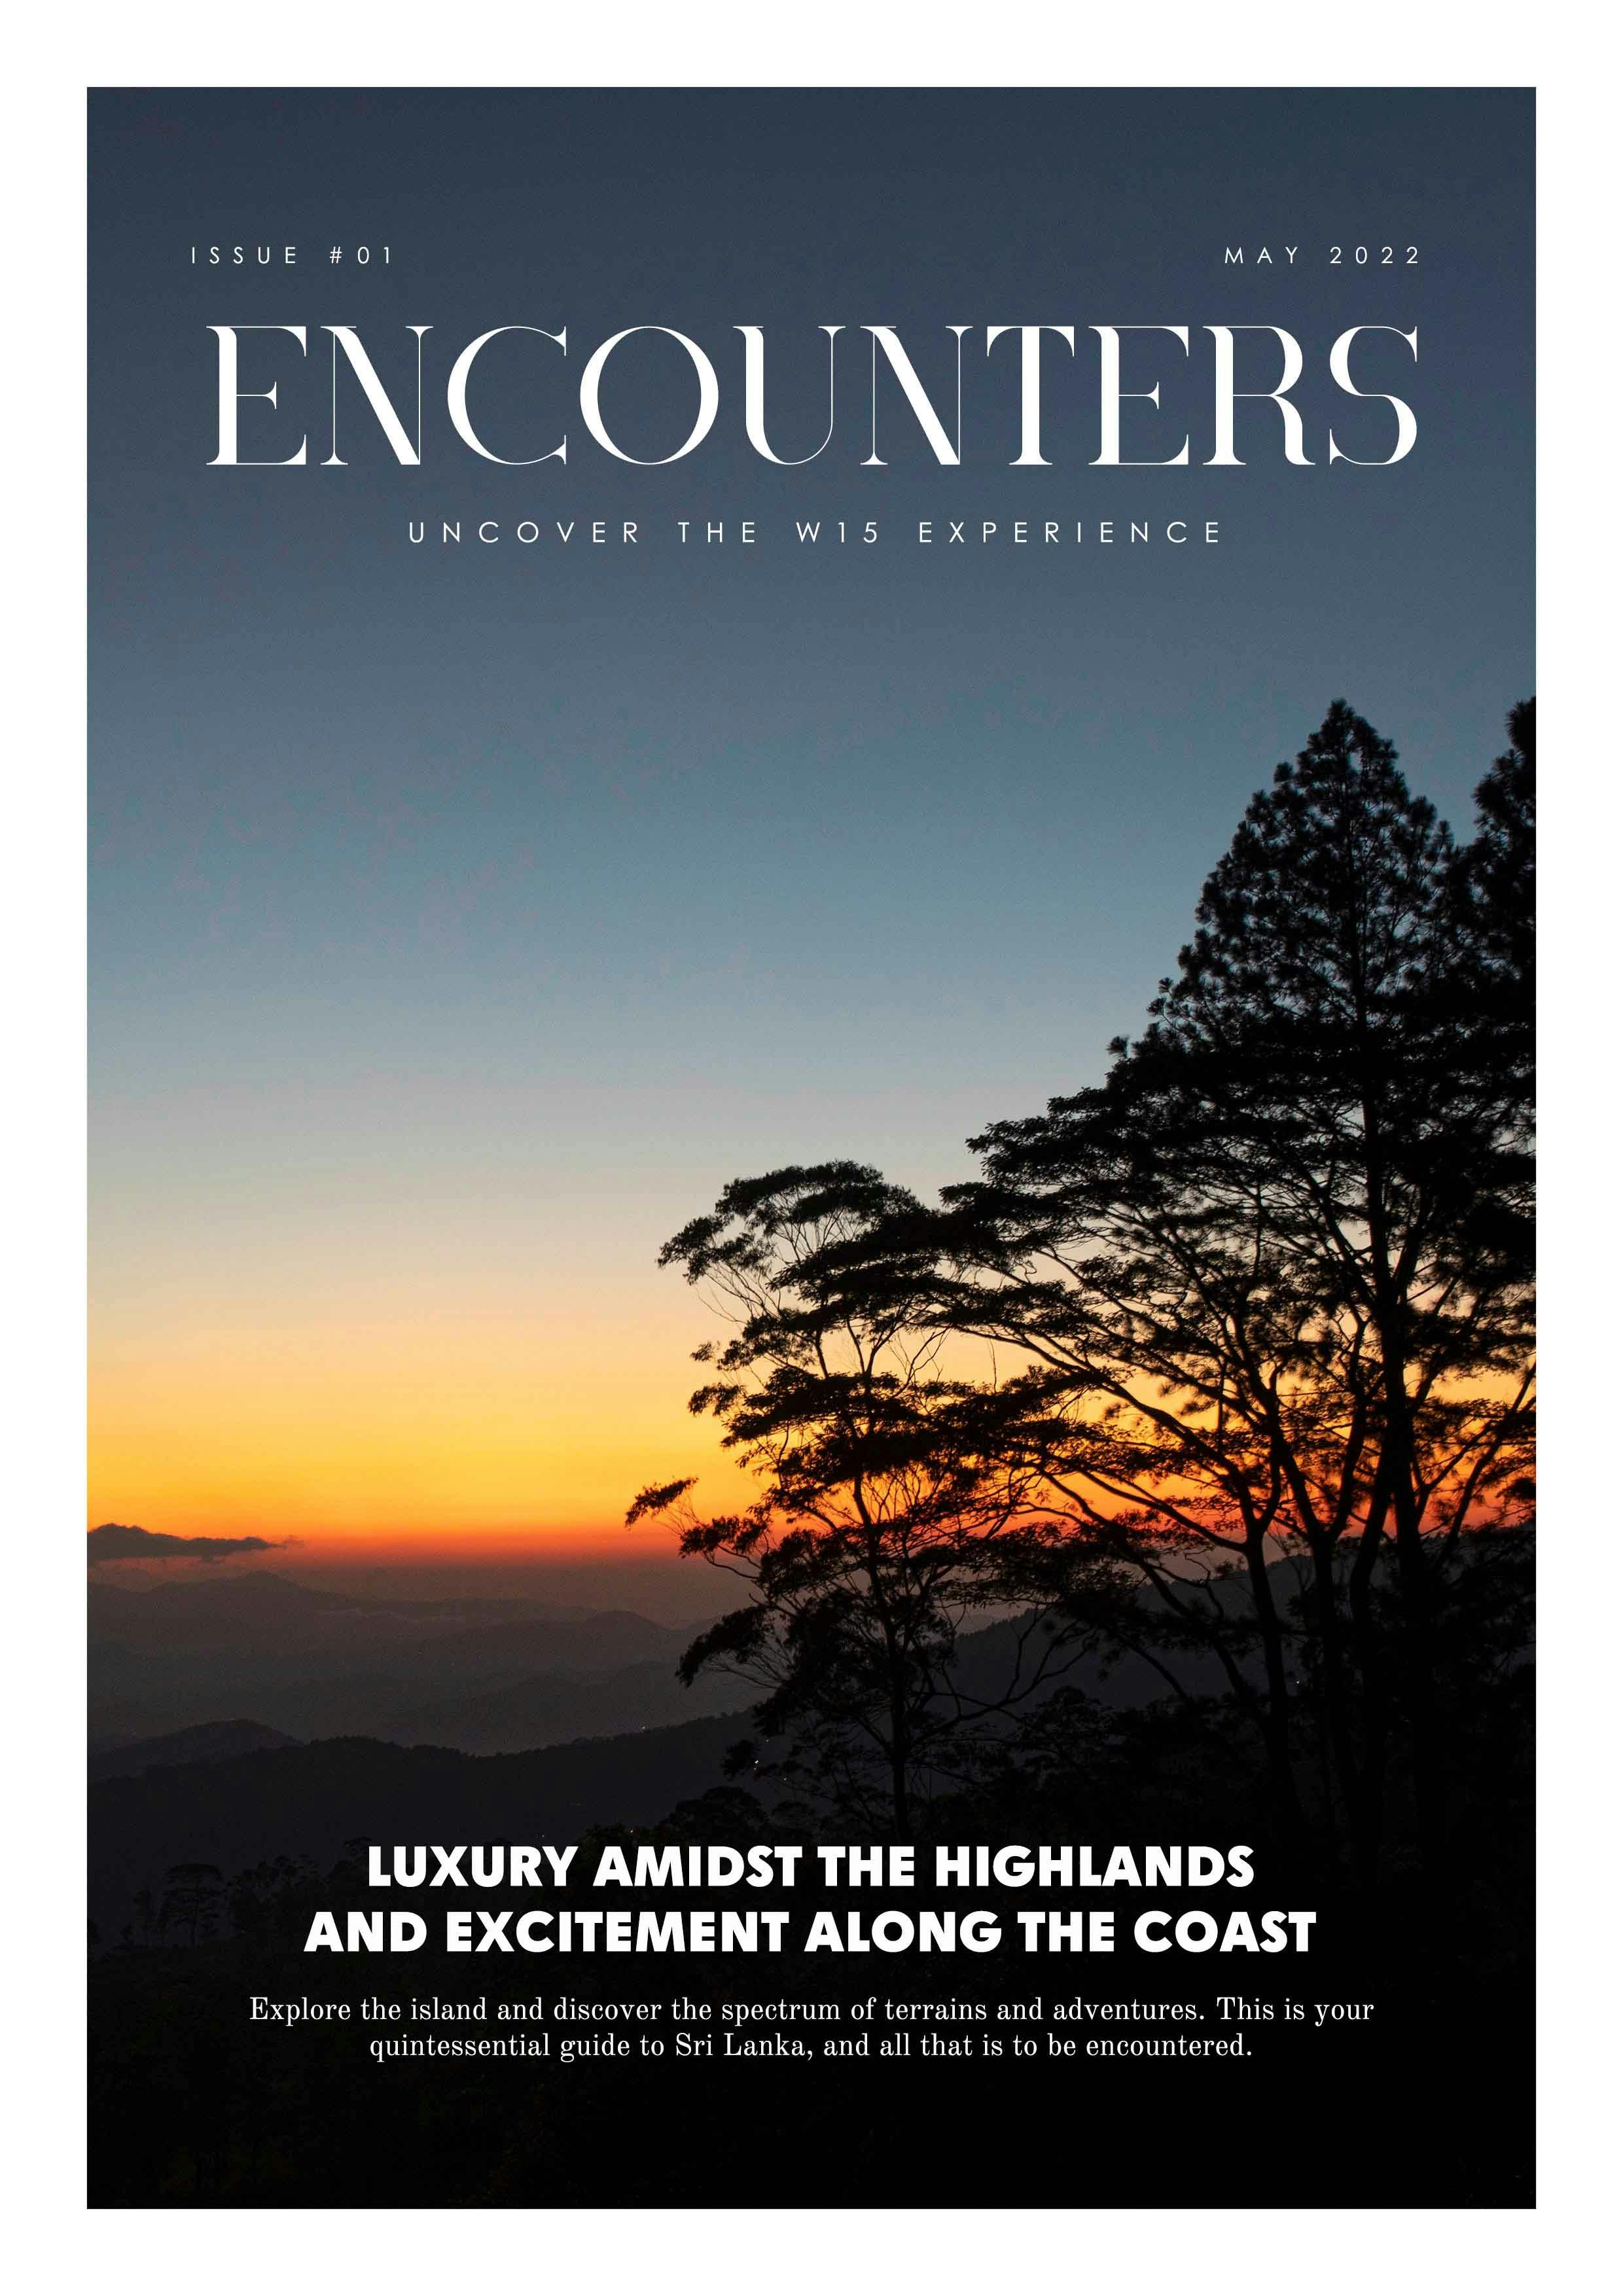 W15 Encounters Magazine Cover May 2022